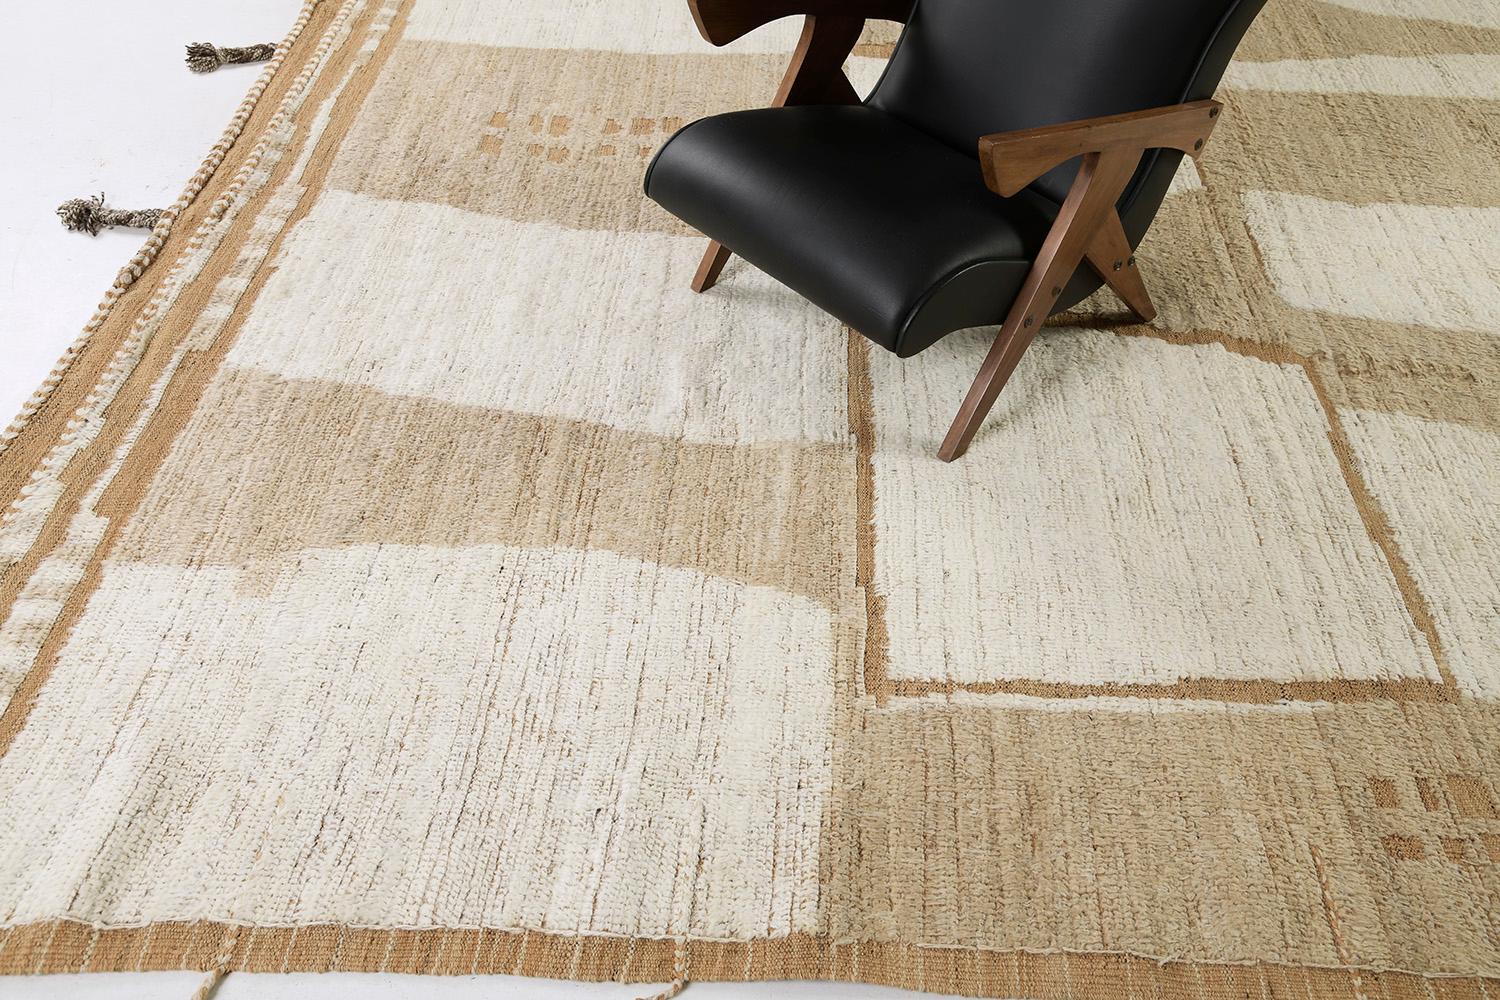 Akal rug is a handwoven wool piece inspired by Scandinavian design elements for the modern design world. The rug's shag balance and harmony, handwoven with playful shades of natural brown and gold-toned pile weave with unique piles of ivory. This